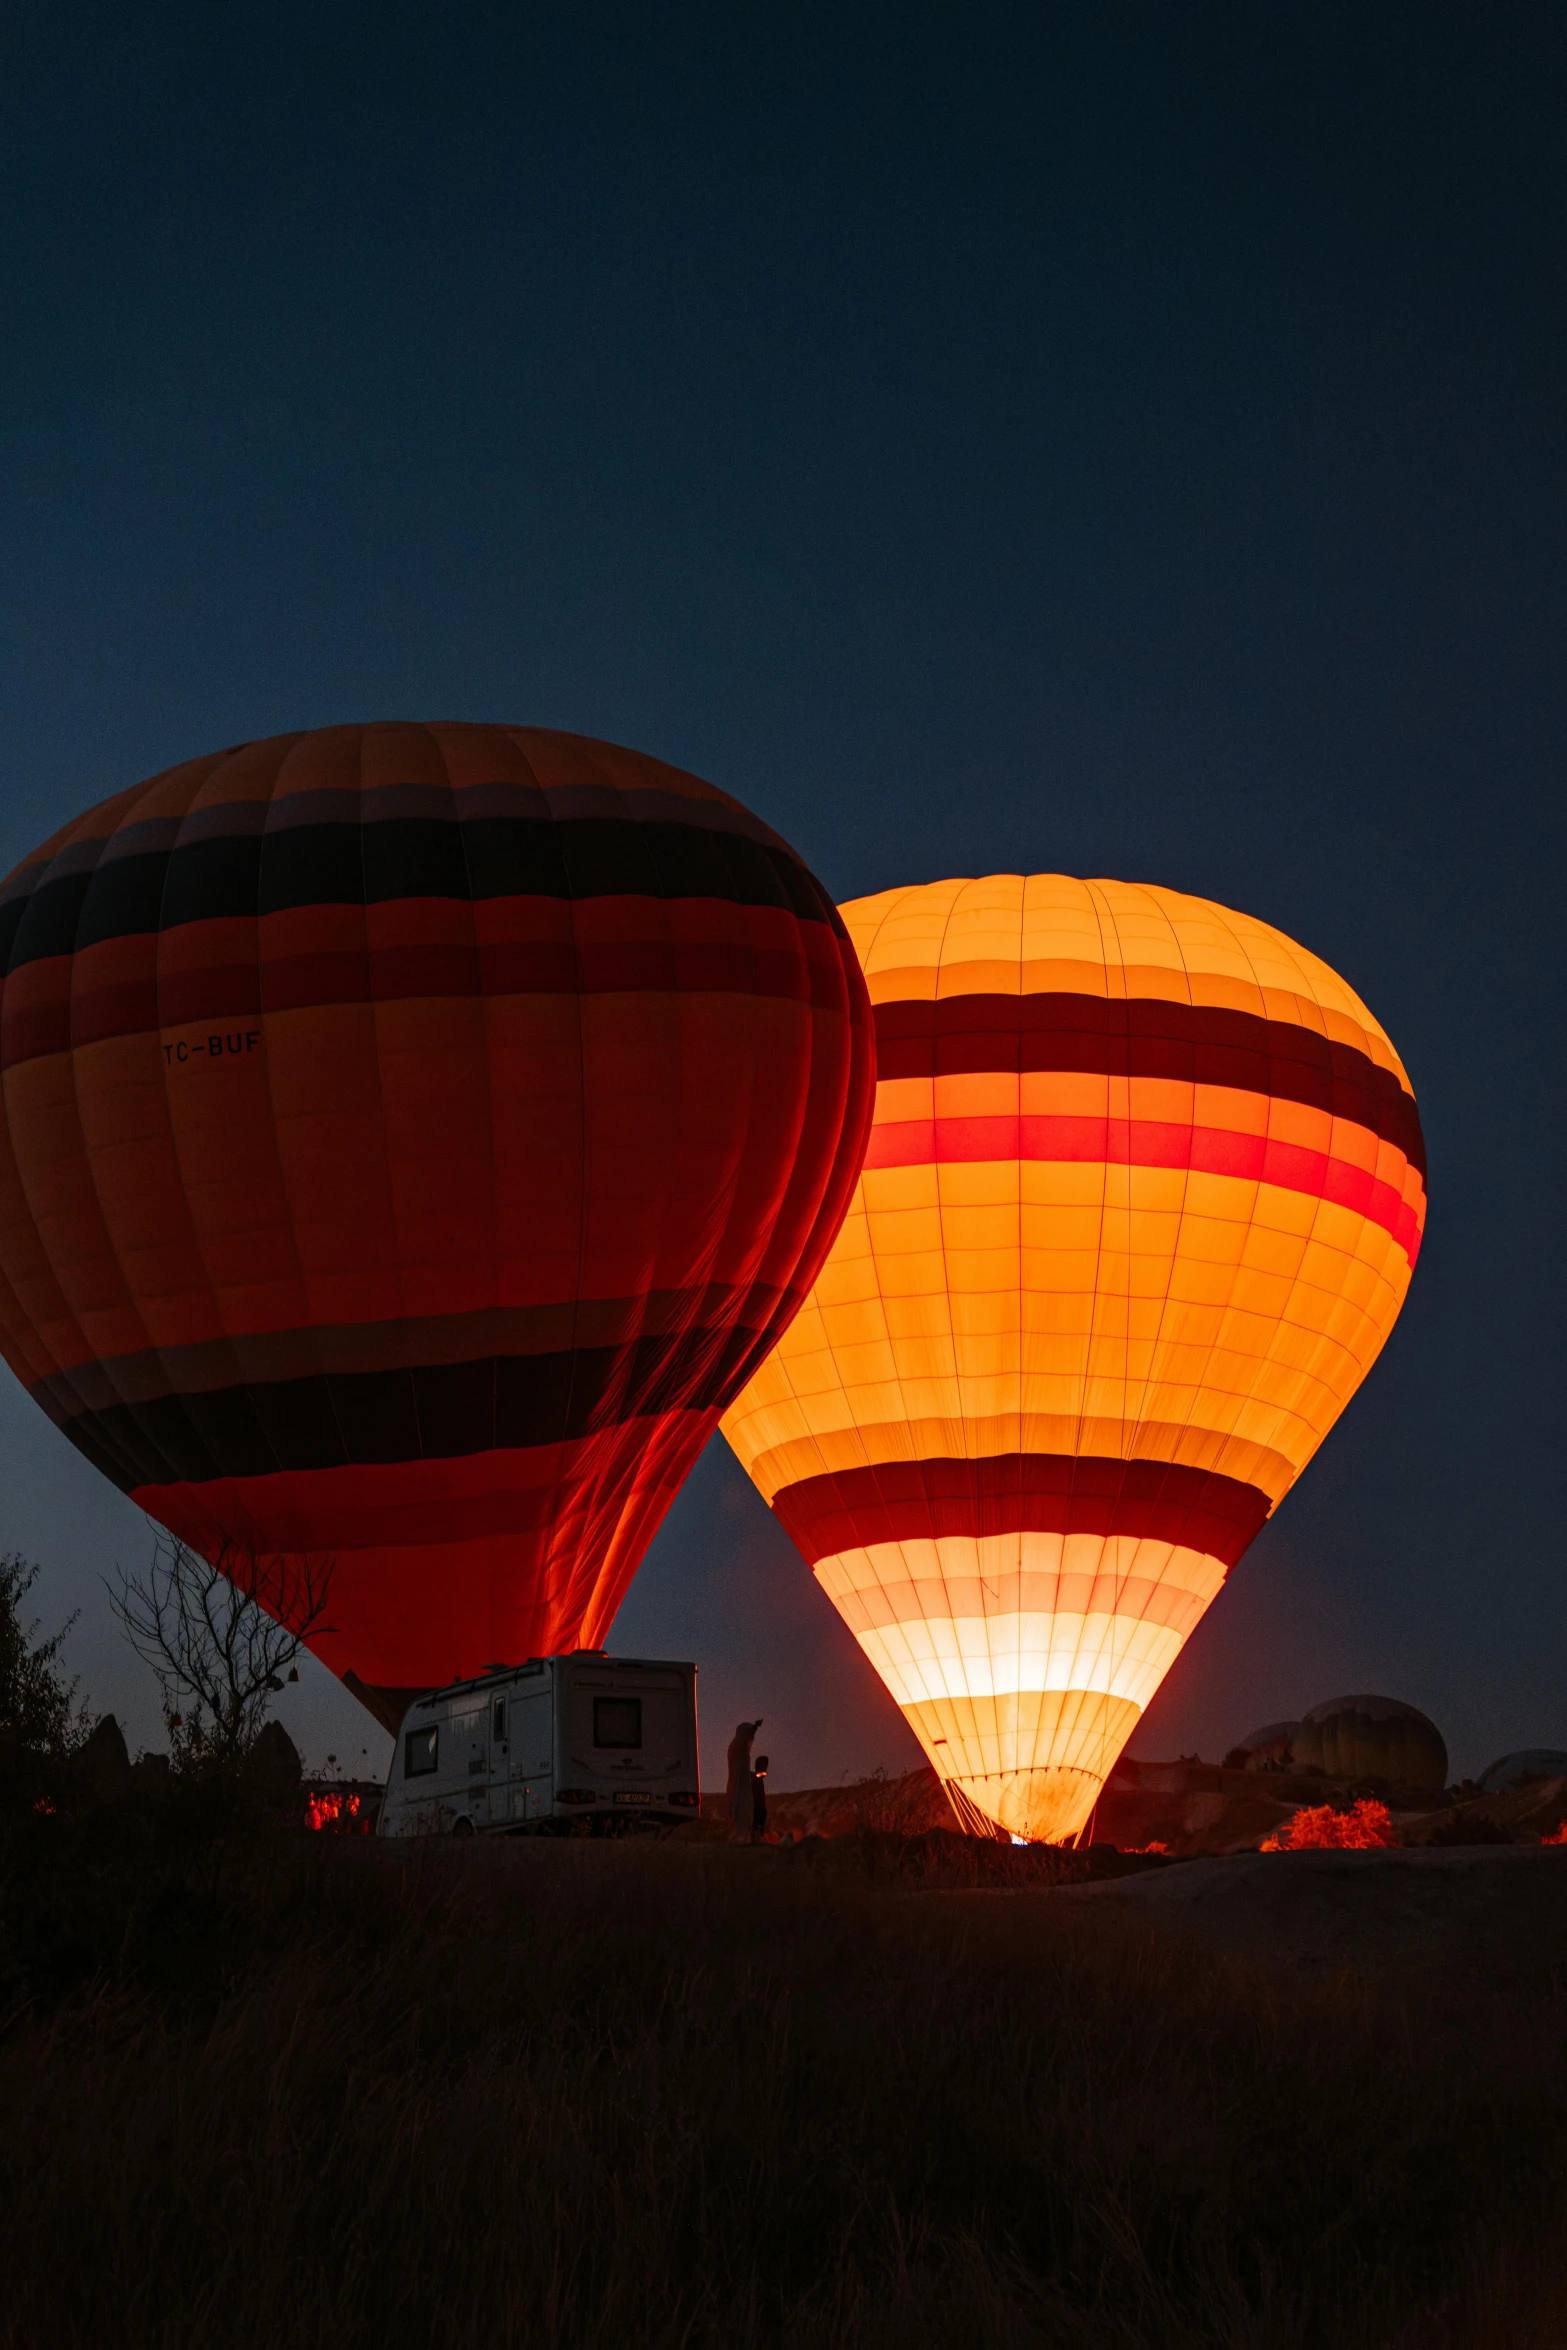 two balloons with lights lit up in the night sky